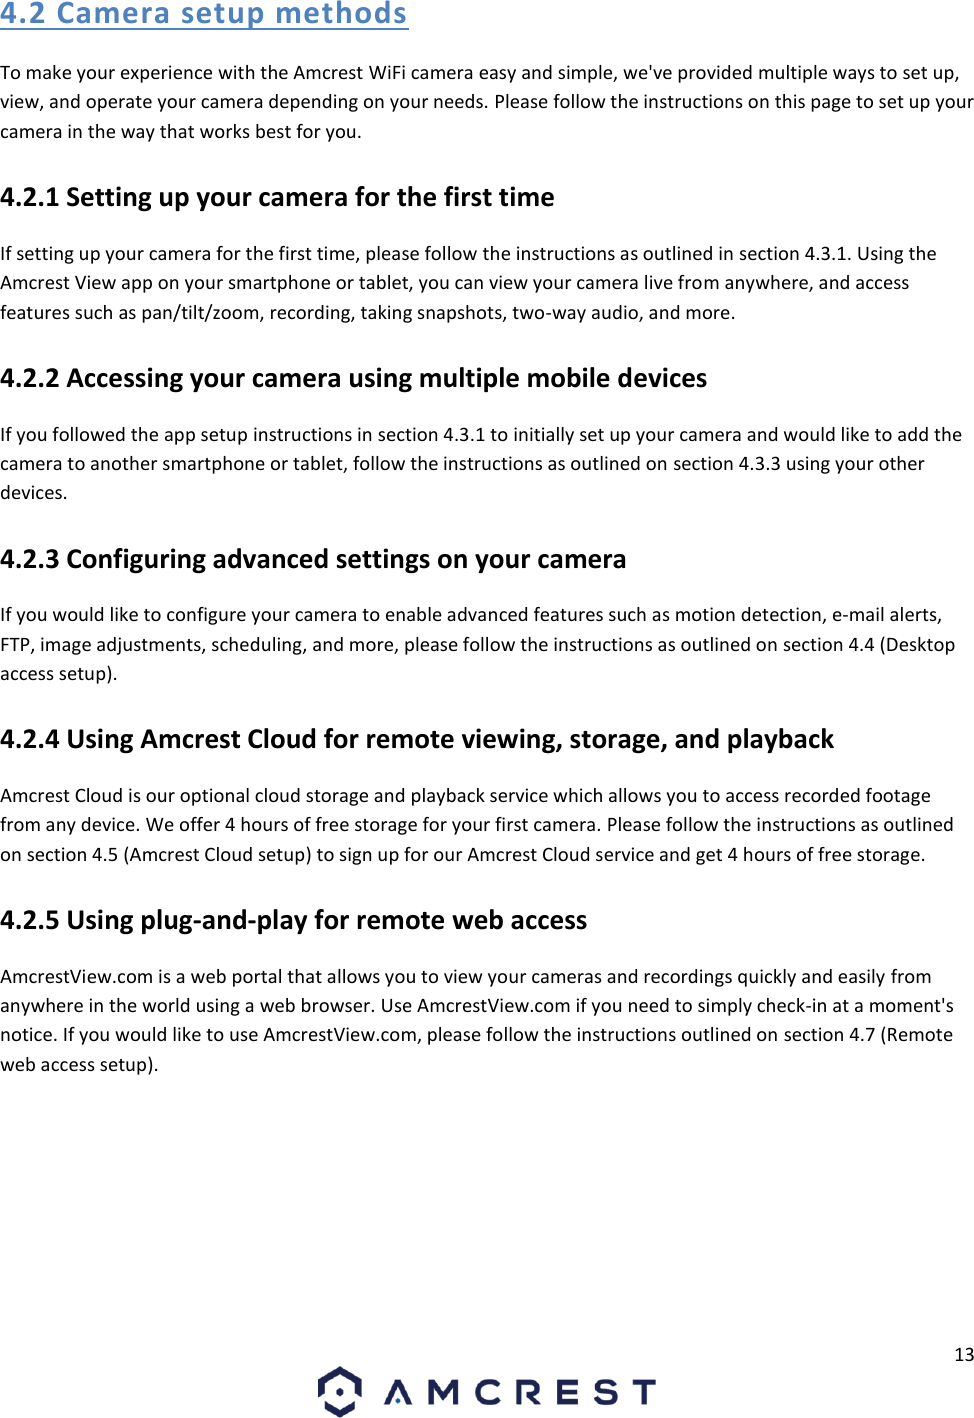 13  4.2 Camera setup methods To make your experience with the Amcrest WiFi camera easy and simple, we&apos;ve provided multiple ways to set up, view, and operate your camera depending on your needs. Please follow the instructions on this page to set up your camera in the way that works best for you. 4.2.1 Setting up your camera for the first time If setting up your camera for the first time, please follow the instructions as outlined in section 4.3.1. Using the Amcrest View app on your smartphone or tablet, you can view your camera live from anywhere, and access features such as pan/tilt/zoom, recording, taking snapshots, two-way audio, and more. 4.2.2 Accessing your camera using multiple mobile devices If you followed the app setup instructions in section 4.3.1 to initially set up your camera and would like to add the camera to another smartphone or tablet, follow the instructions as outlined on section 4.3.3 using your other devices. 4.2.3 Configuring advanced settings on your camera If you would like to configure your camera to enable advanced features such as motion detection, e-mail alerts, FTP, image adjustments, scheduling, and more, please follow the instructions as outlined on section 4.4 (Desktop access setup). 4.2.4 Using Amcrest Cloud for remote viewing, storage, and playback Amcrest Cloud is our optional cloud storage and playback service which allows you to access recorded footage from any device. We offer 4 hours of free storage for your first camera. Please follow the instructions as outlined on section 4.5 (Amcrest Cloud setup) to sign up for our Amcrest Cloud service and get 4 hours of free storage. 4.2.5 Using plug-and-play for remote web access AmcrestView.com is a web portal that allows you to view your cameras and recordings quickly and easily from anywhere in the world using a web browser. Use AmcrestView.com if you need to simply check-in at a moment&apos;s notice. If you would like to use AmcrestView.com, please follow the instructions outlined on section 4.7 (Remote web access setup).    